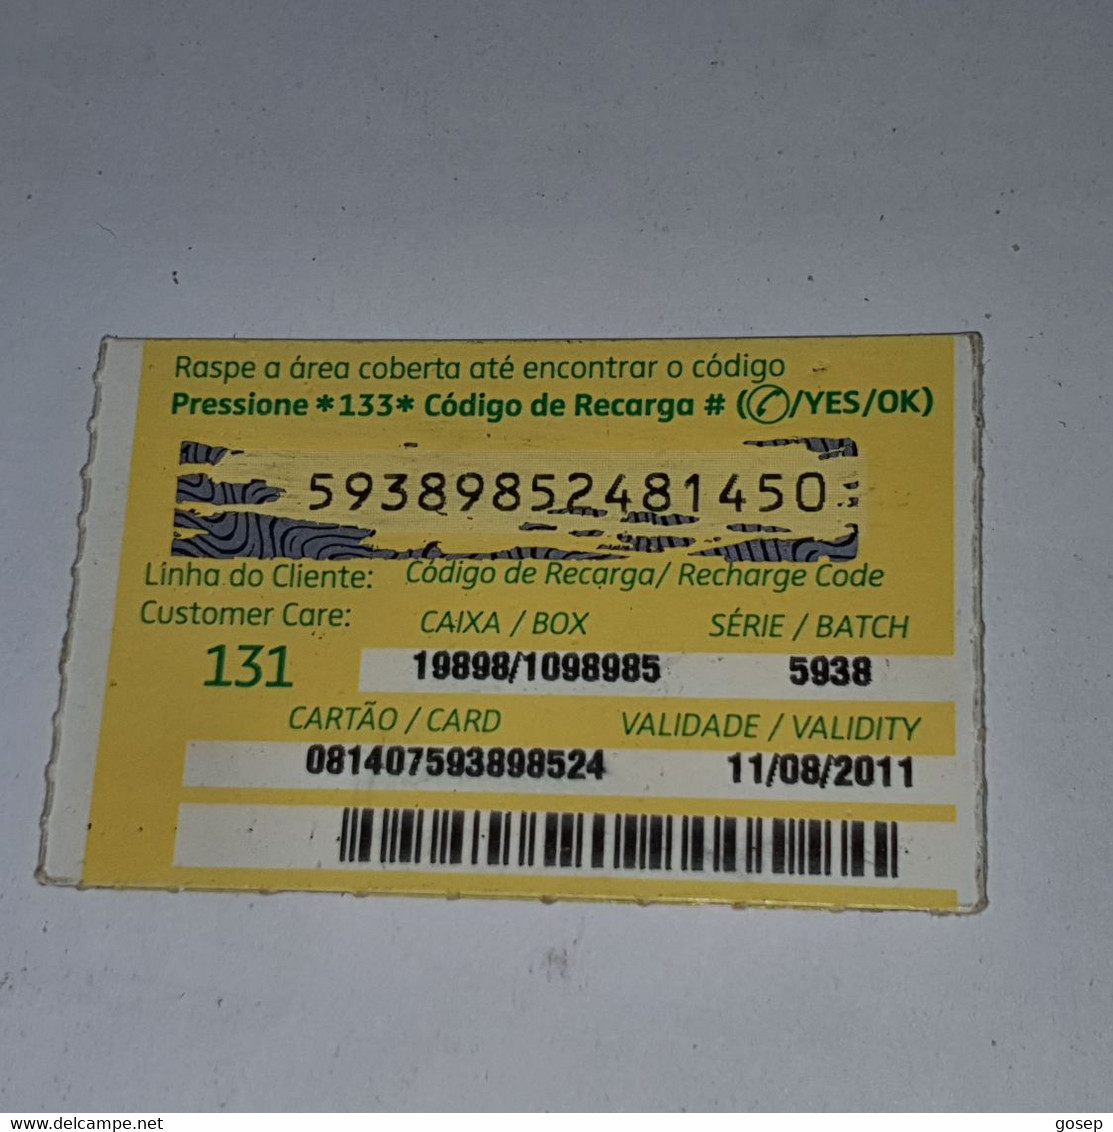 Mozambique-(MZ-MCE-REC-0003/C/2)-(8)-girl And Boy-(59389852481450)-(11/8/2011)-used Card - Mozambico